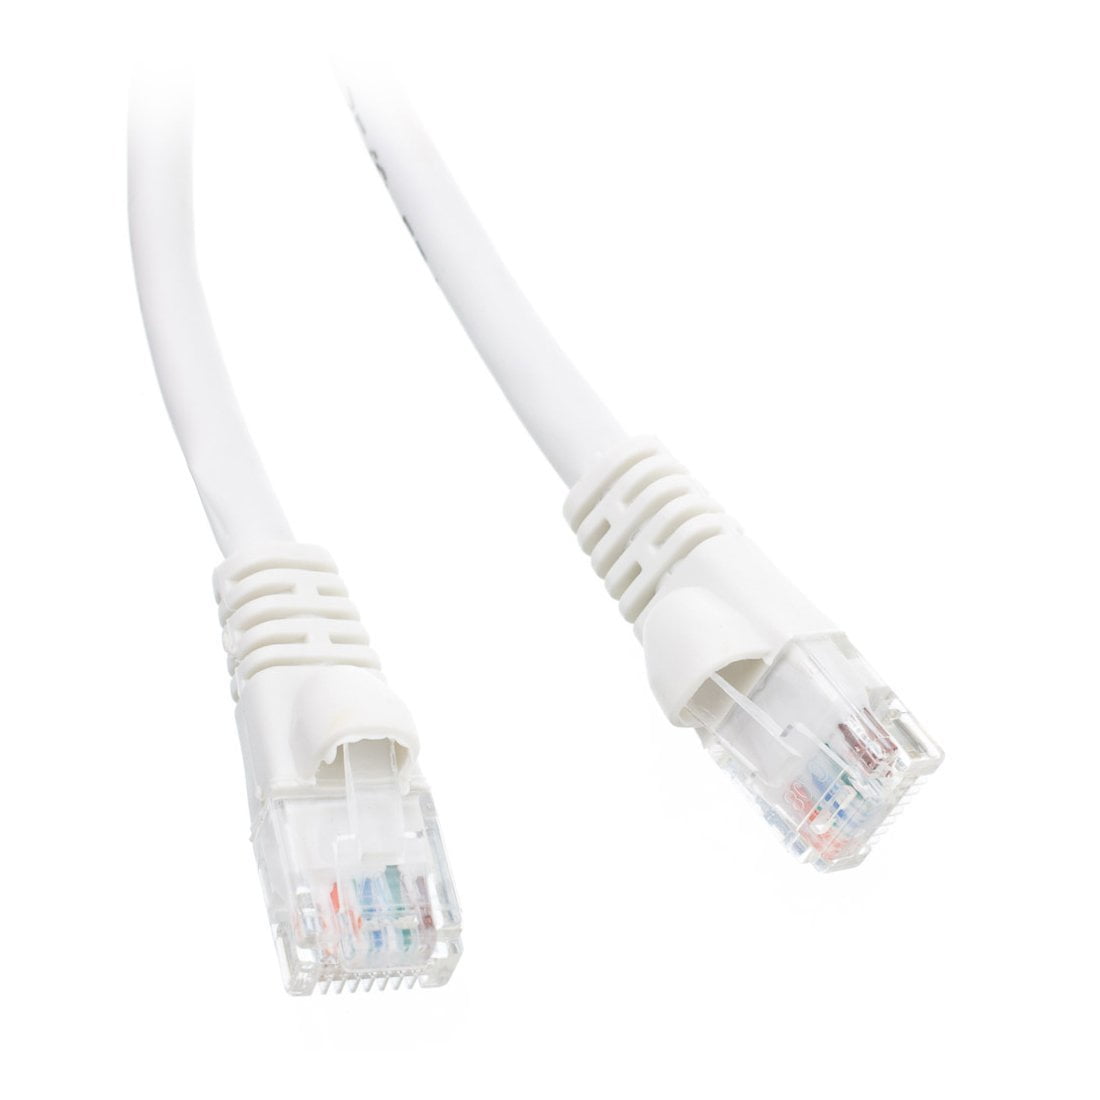 C&E Cat5e Ethernet Patch Cable CNE469961 MarginMart Inc. Snagless/Molded Boot 2 Feet Black